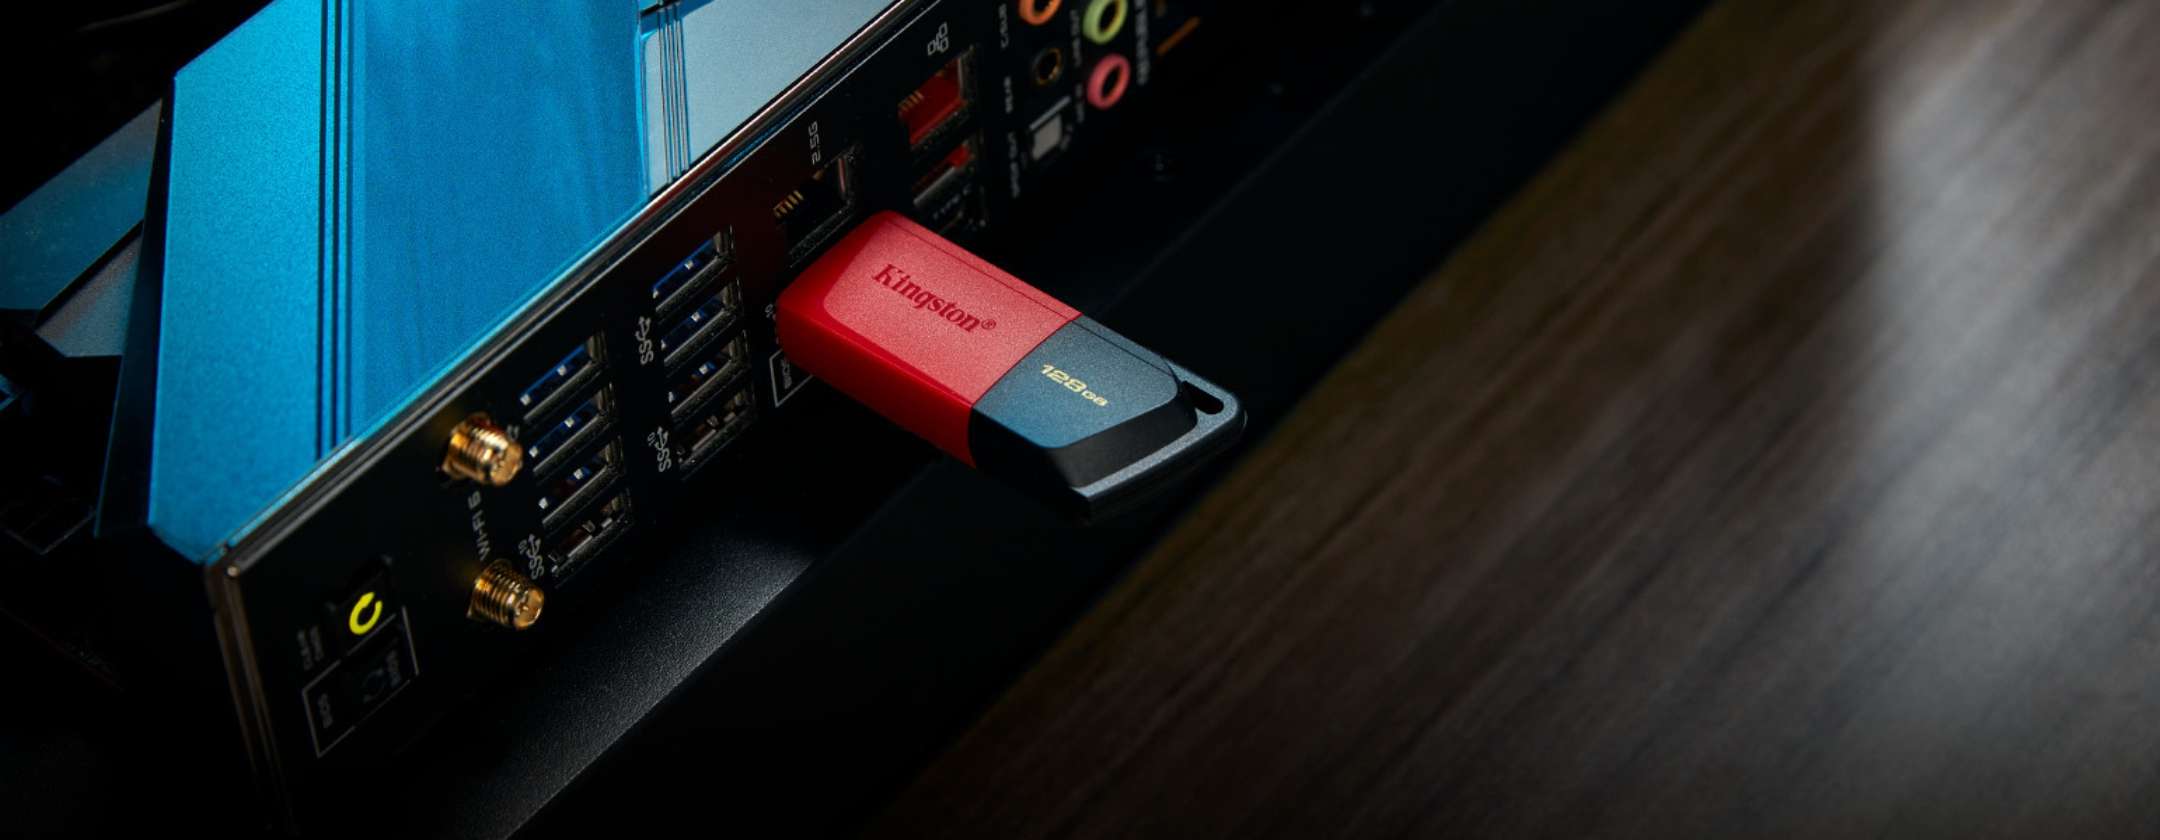 128 GB High Performance USB Flash Drive for a gift price